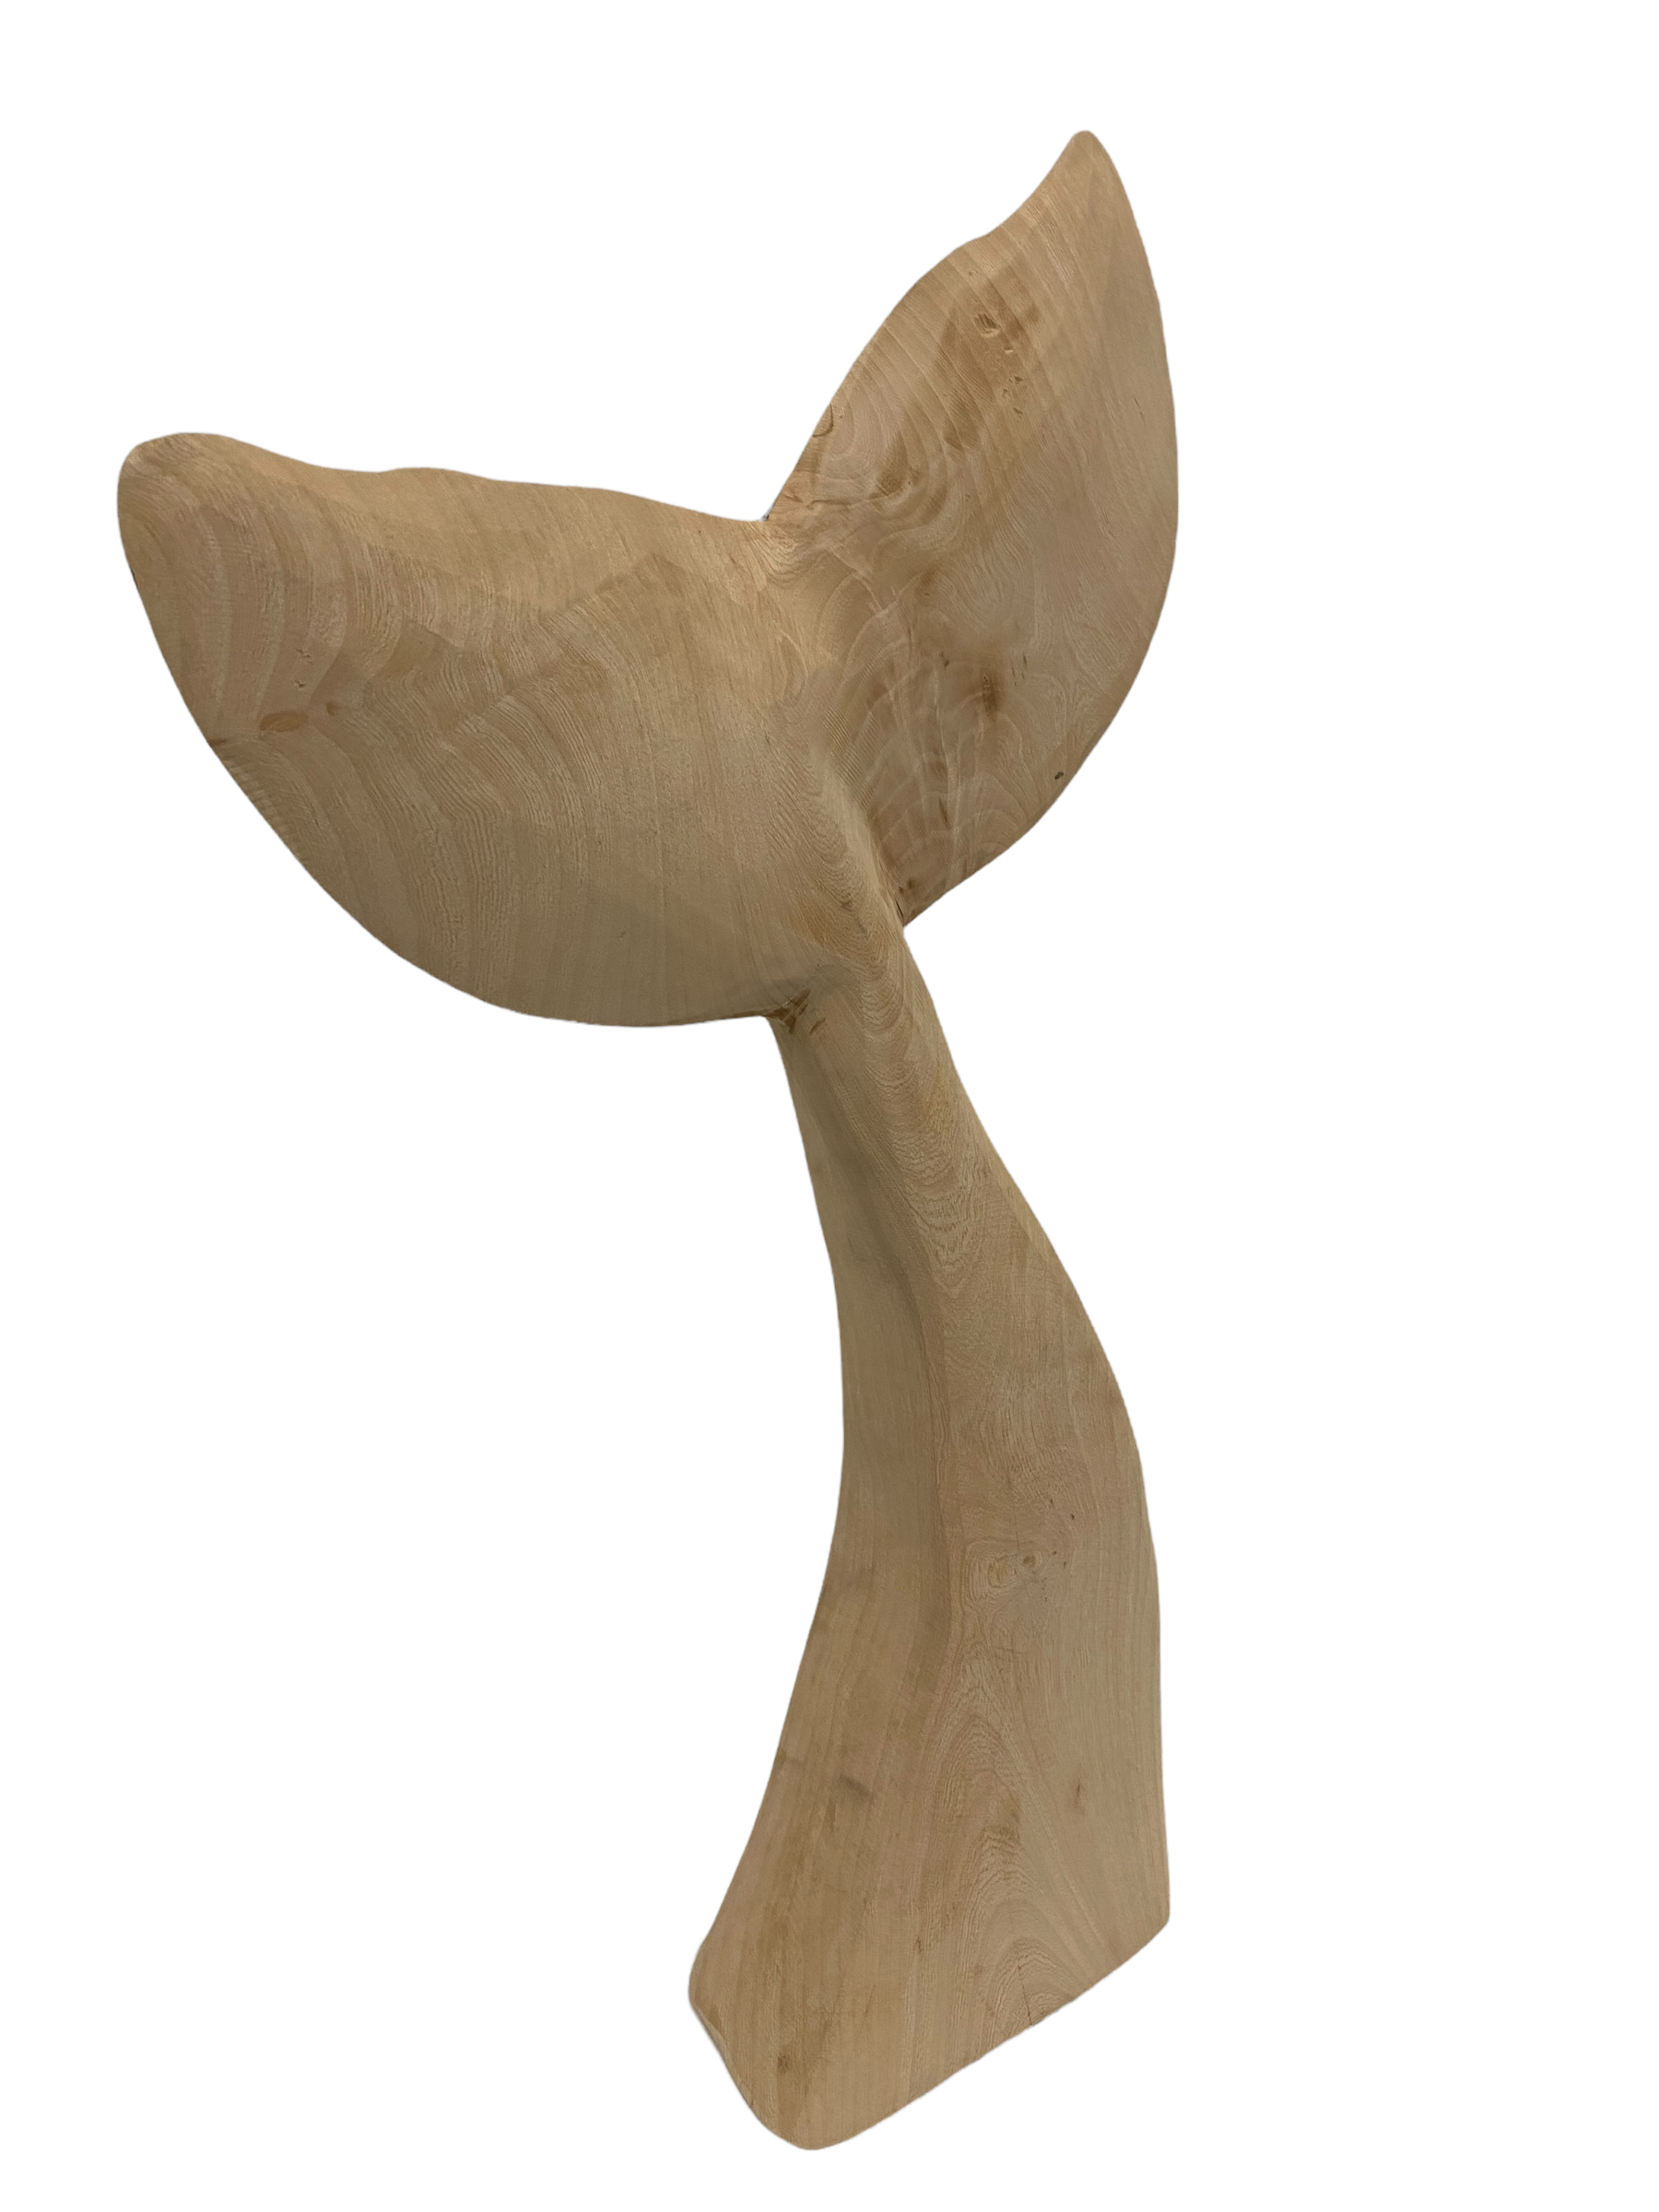 Wooden Hand carved Whale Fin (38M)